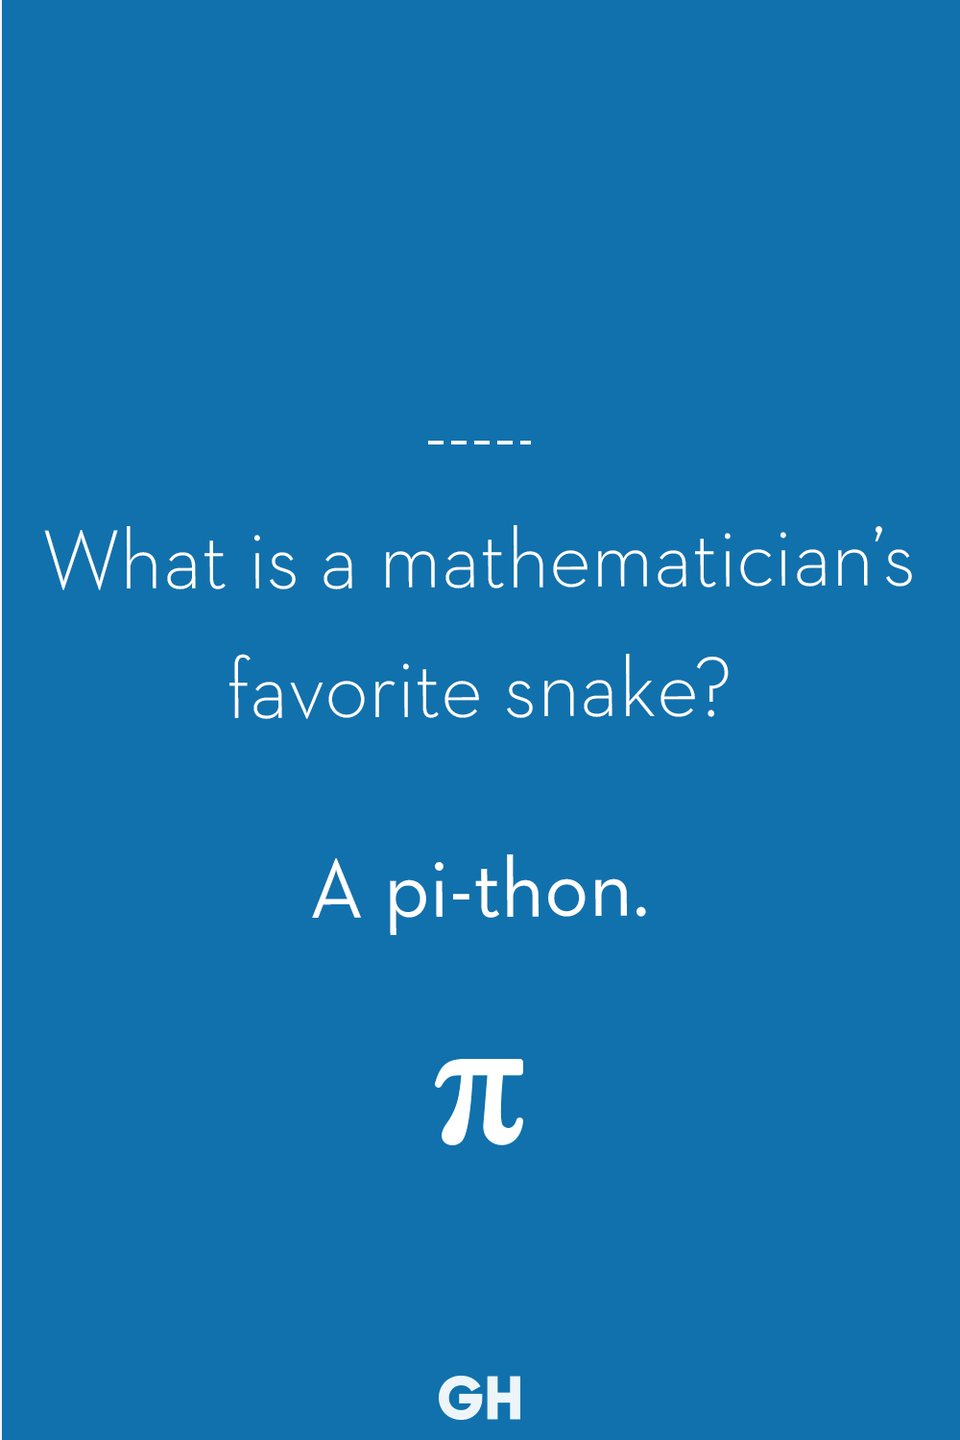 14) What is a mathematician’s favorite snake?